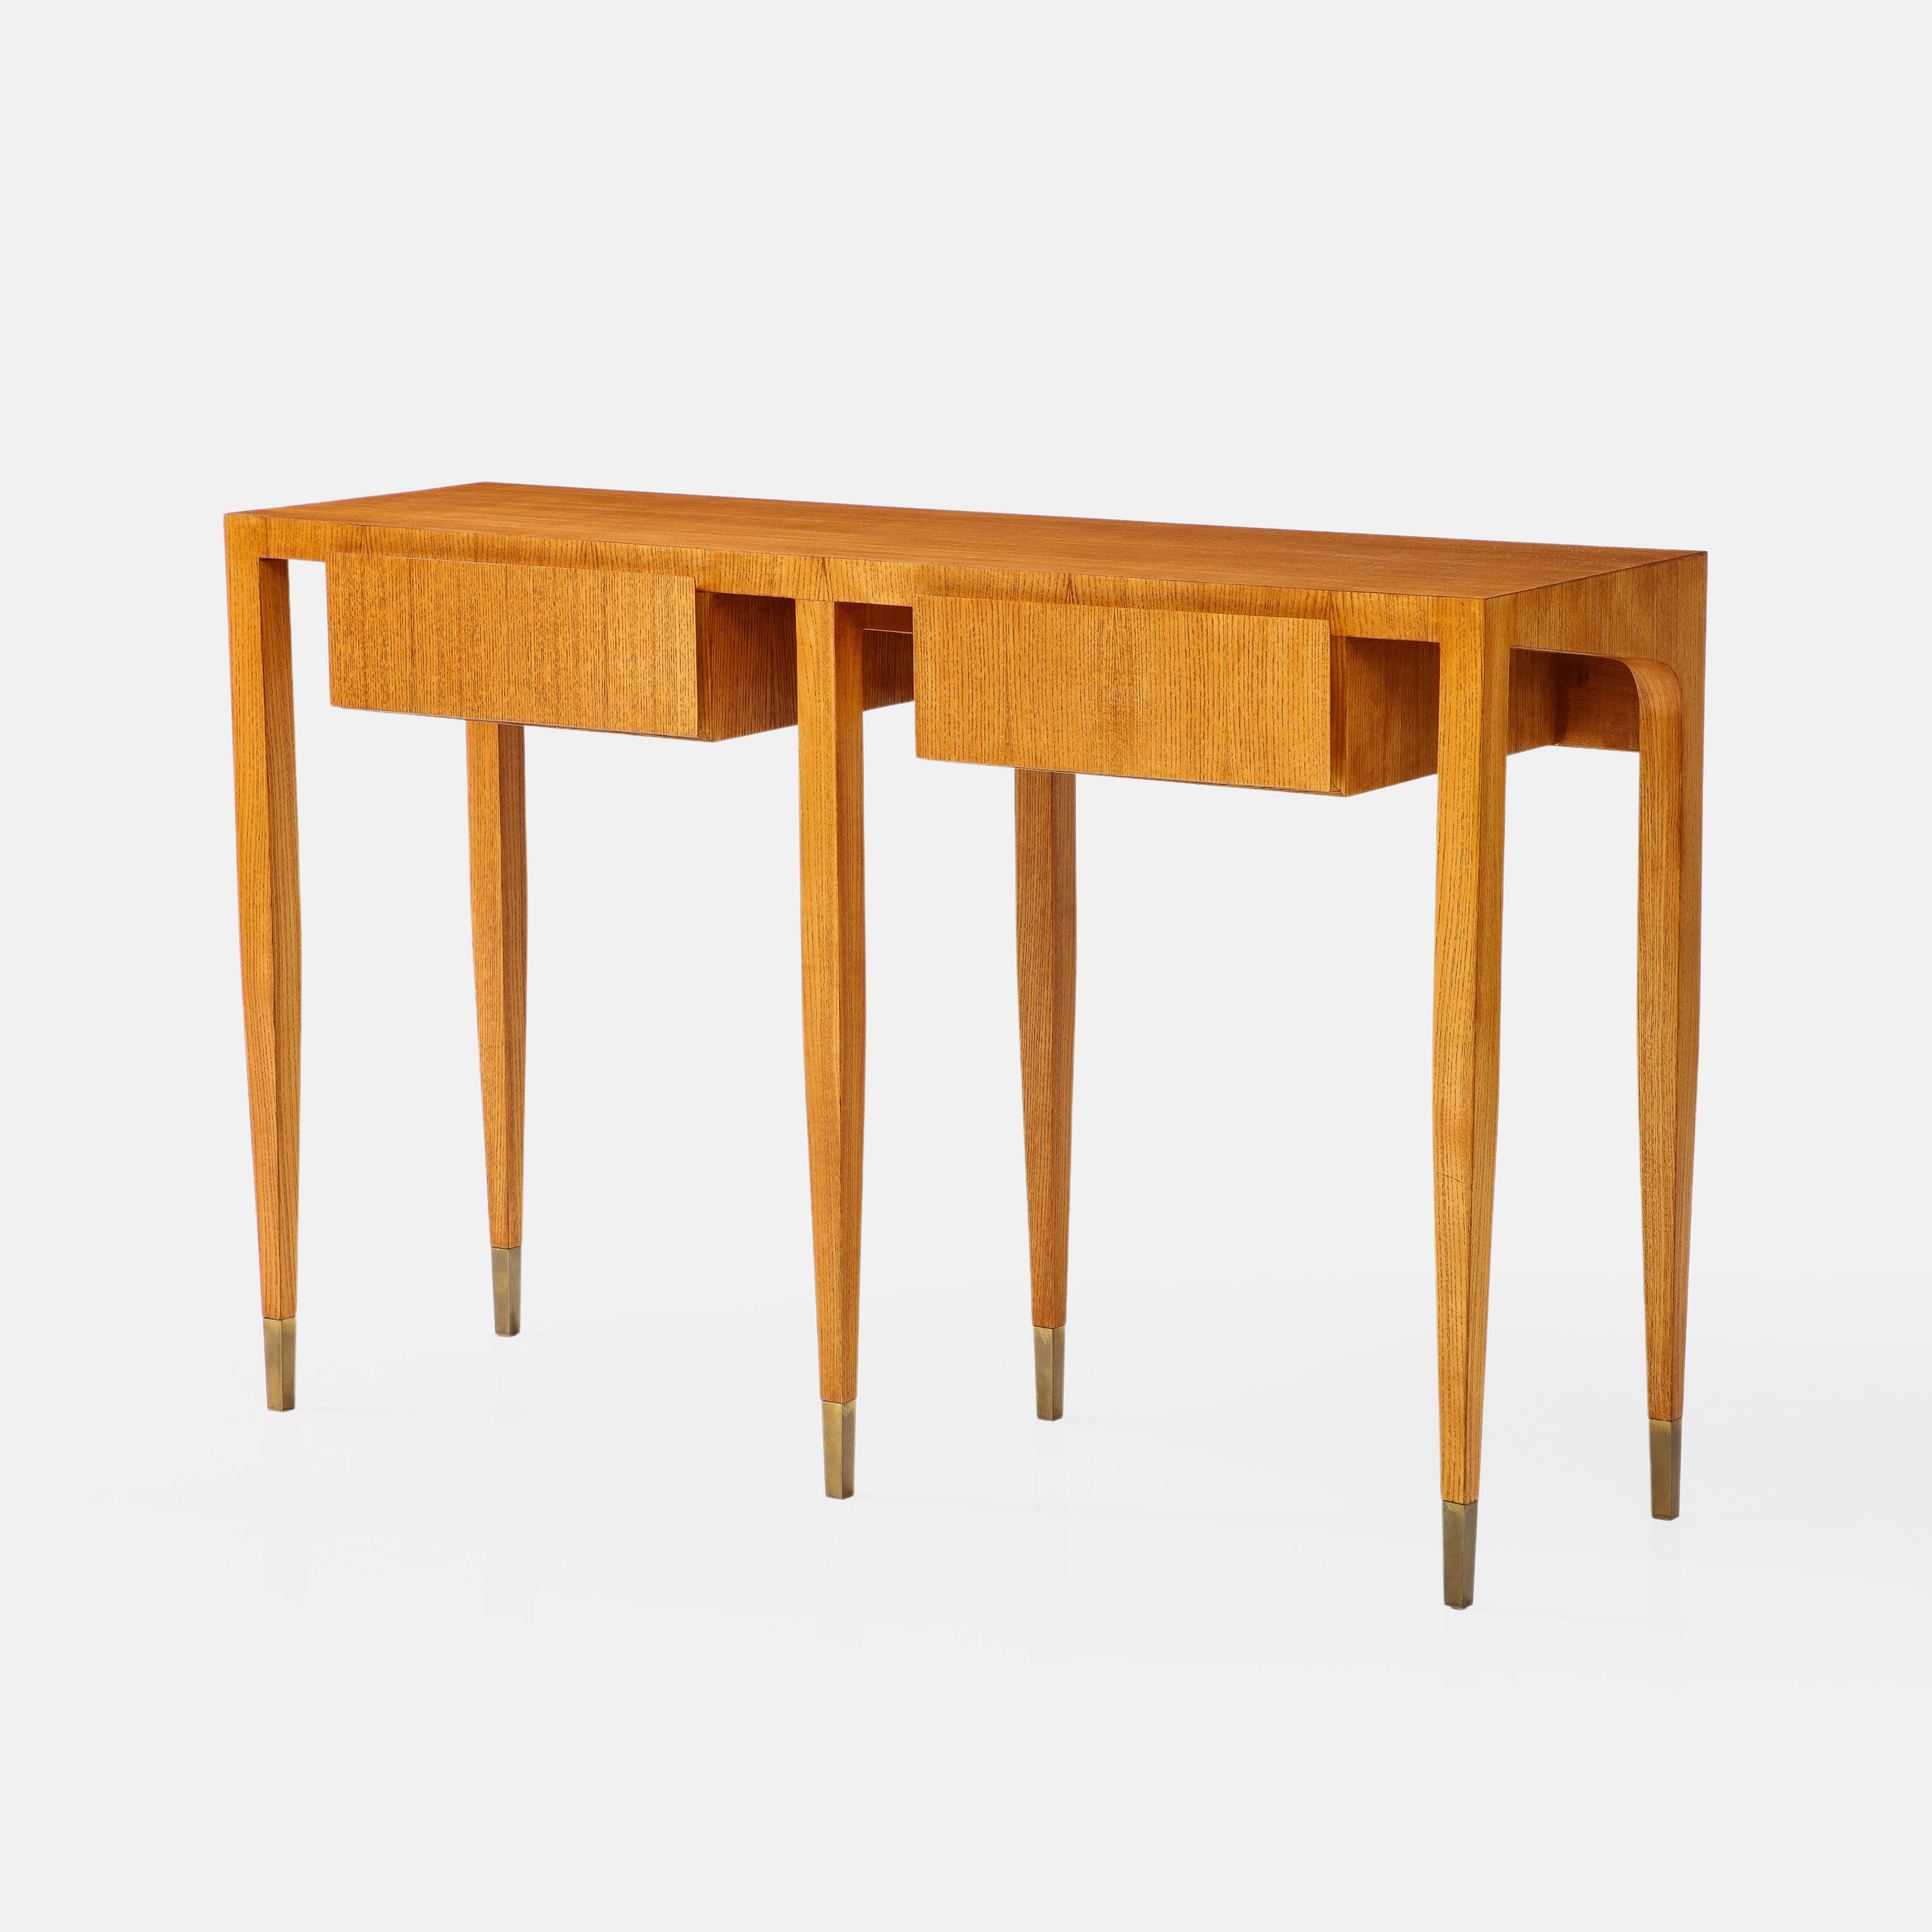 Gio Ponti for Giordano Chiesa Rare Pair of Ash Wood Consoles, Italy, 1950s For Sale 8